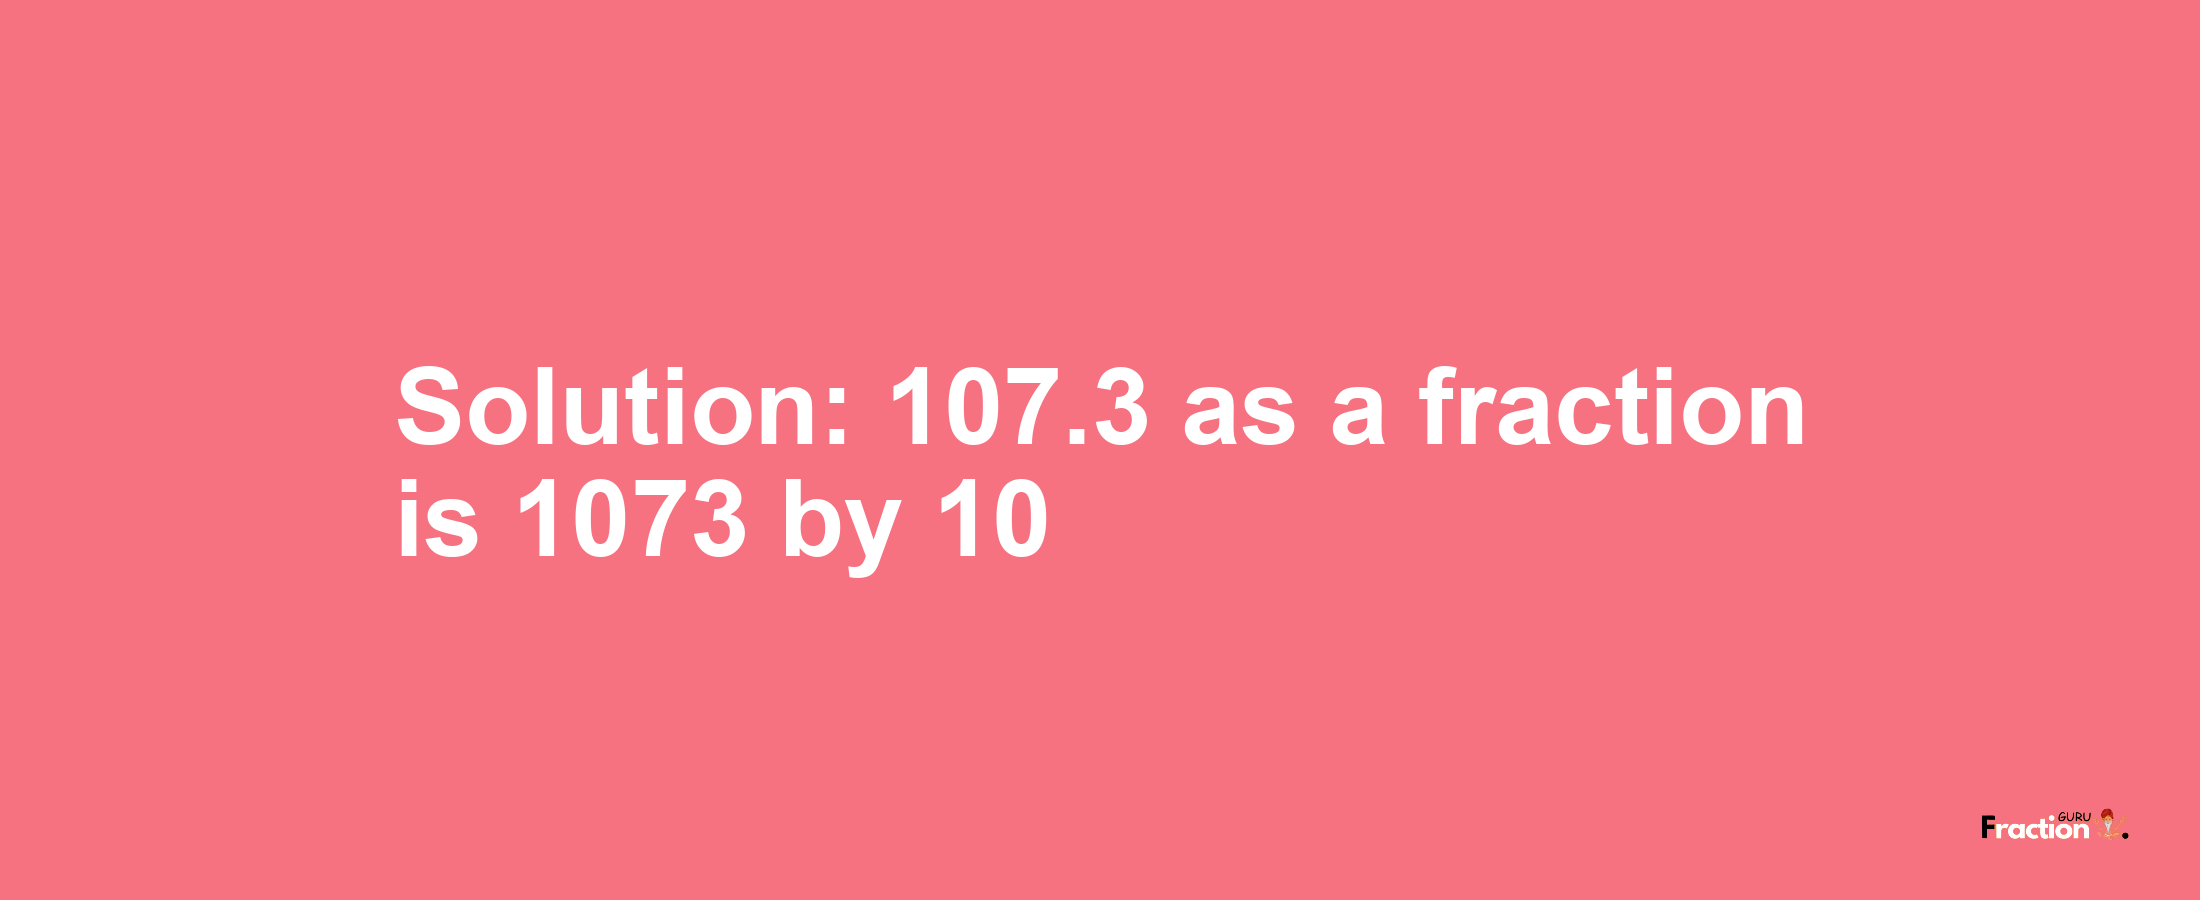 Solution:107.3 as a fraction is 1073/10